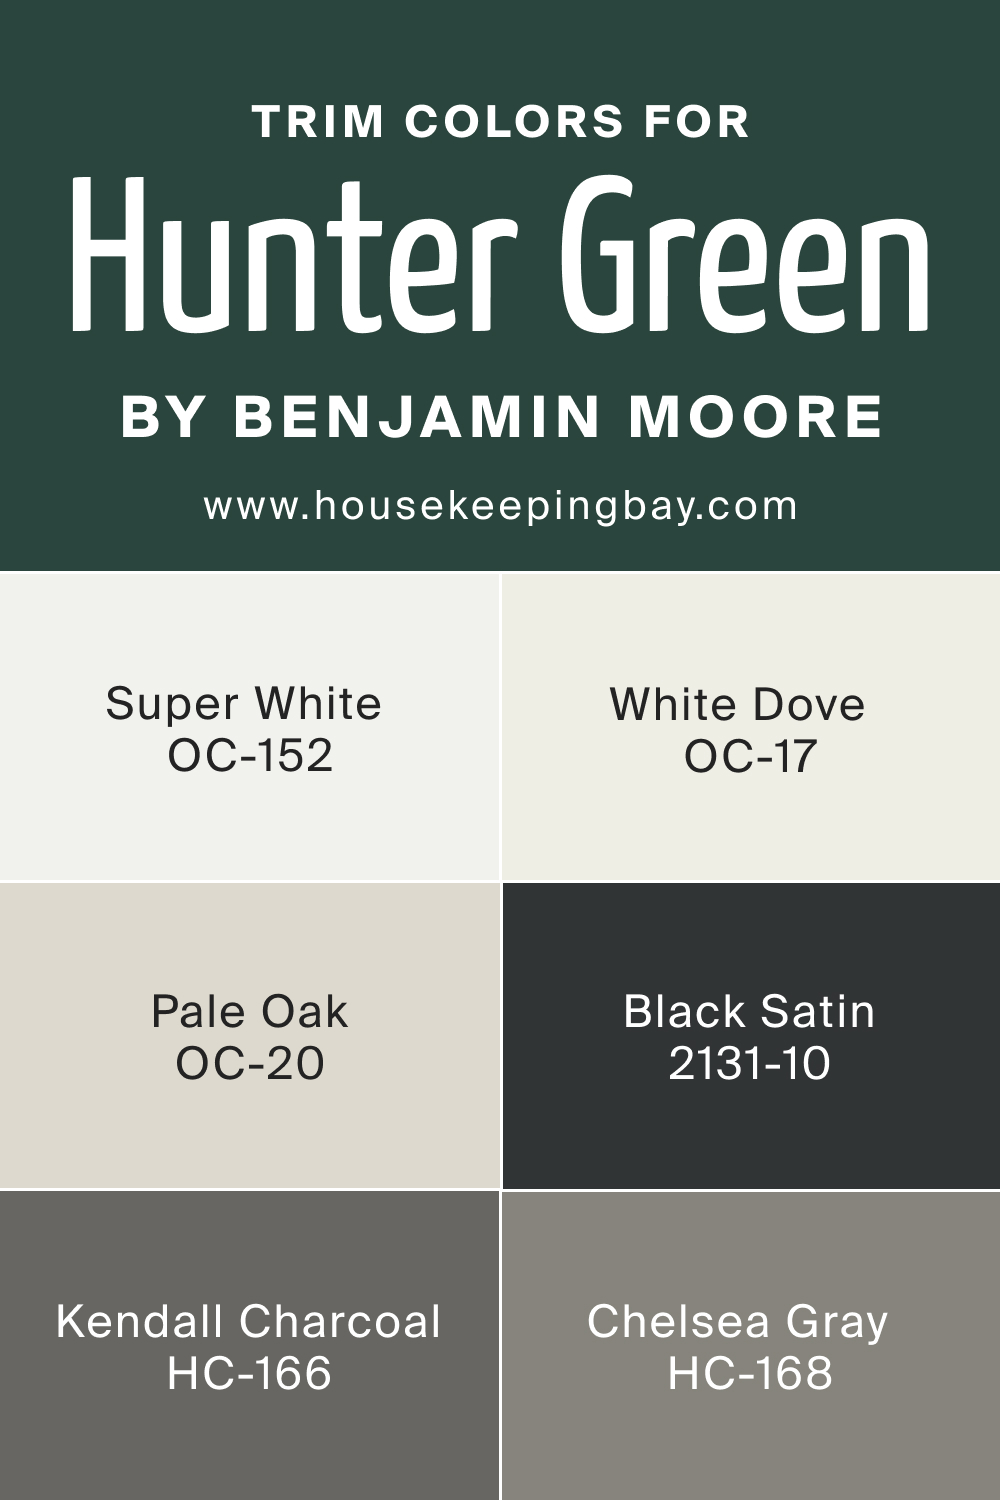 What Is the Best Trim Color For Hunter Green 2041-10